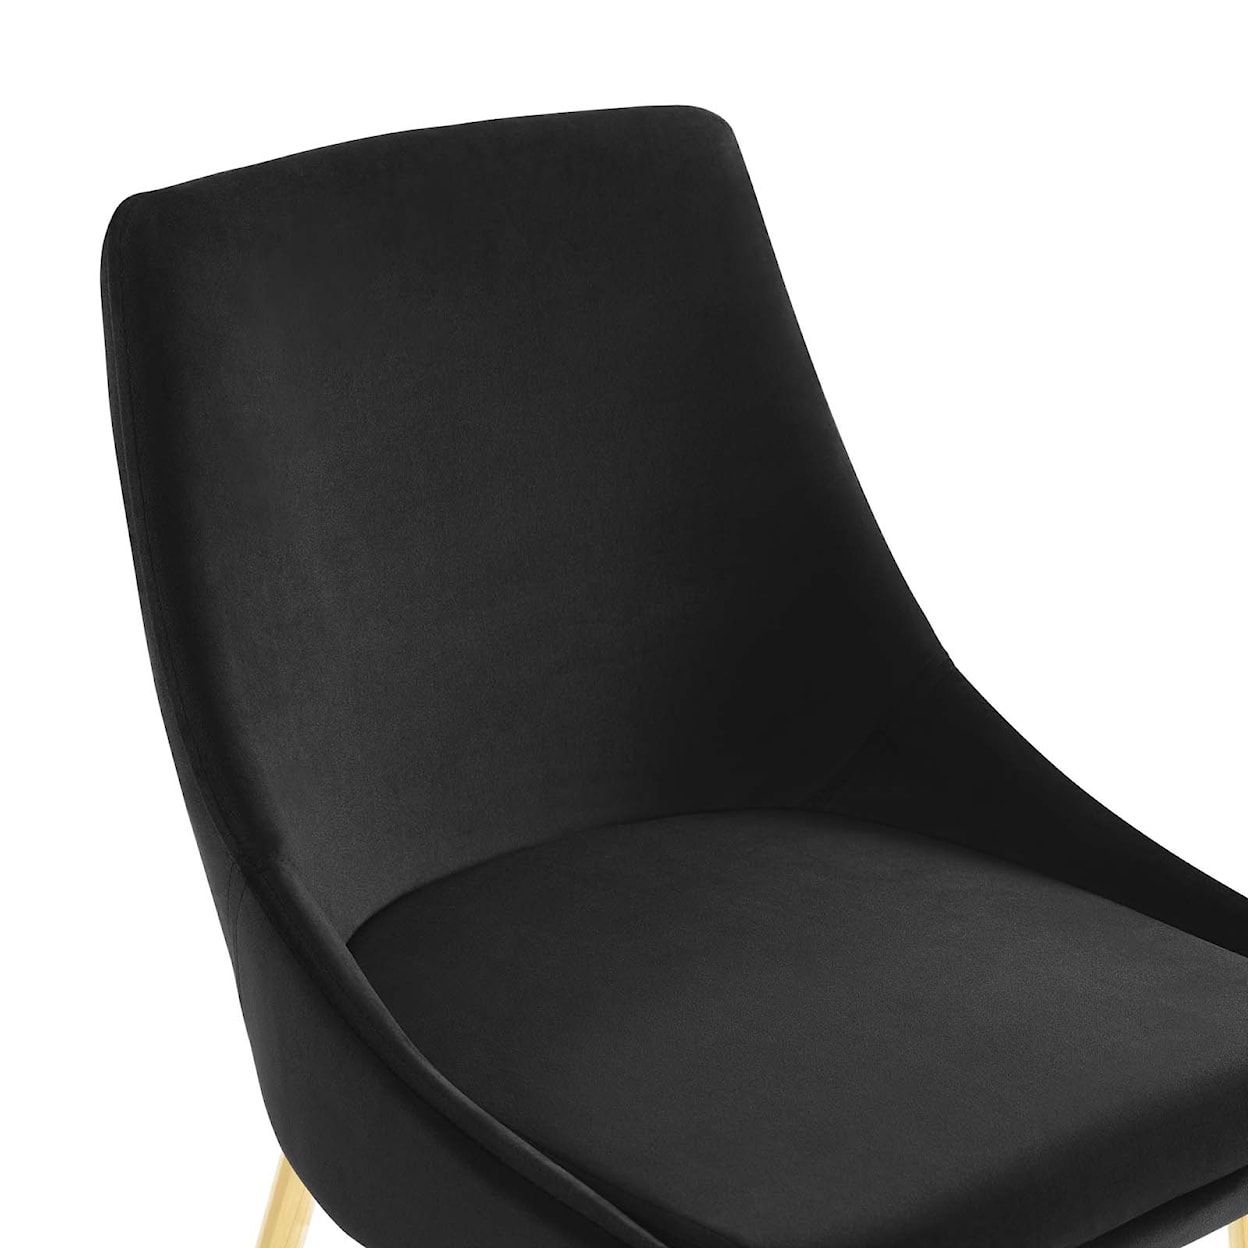 Modway Viscount Dining Chairs